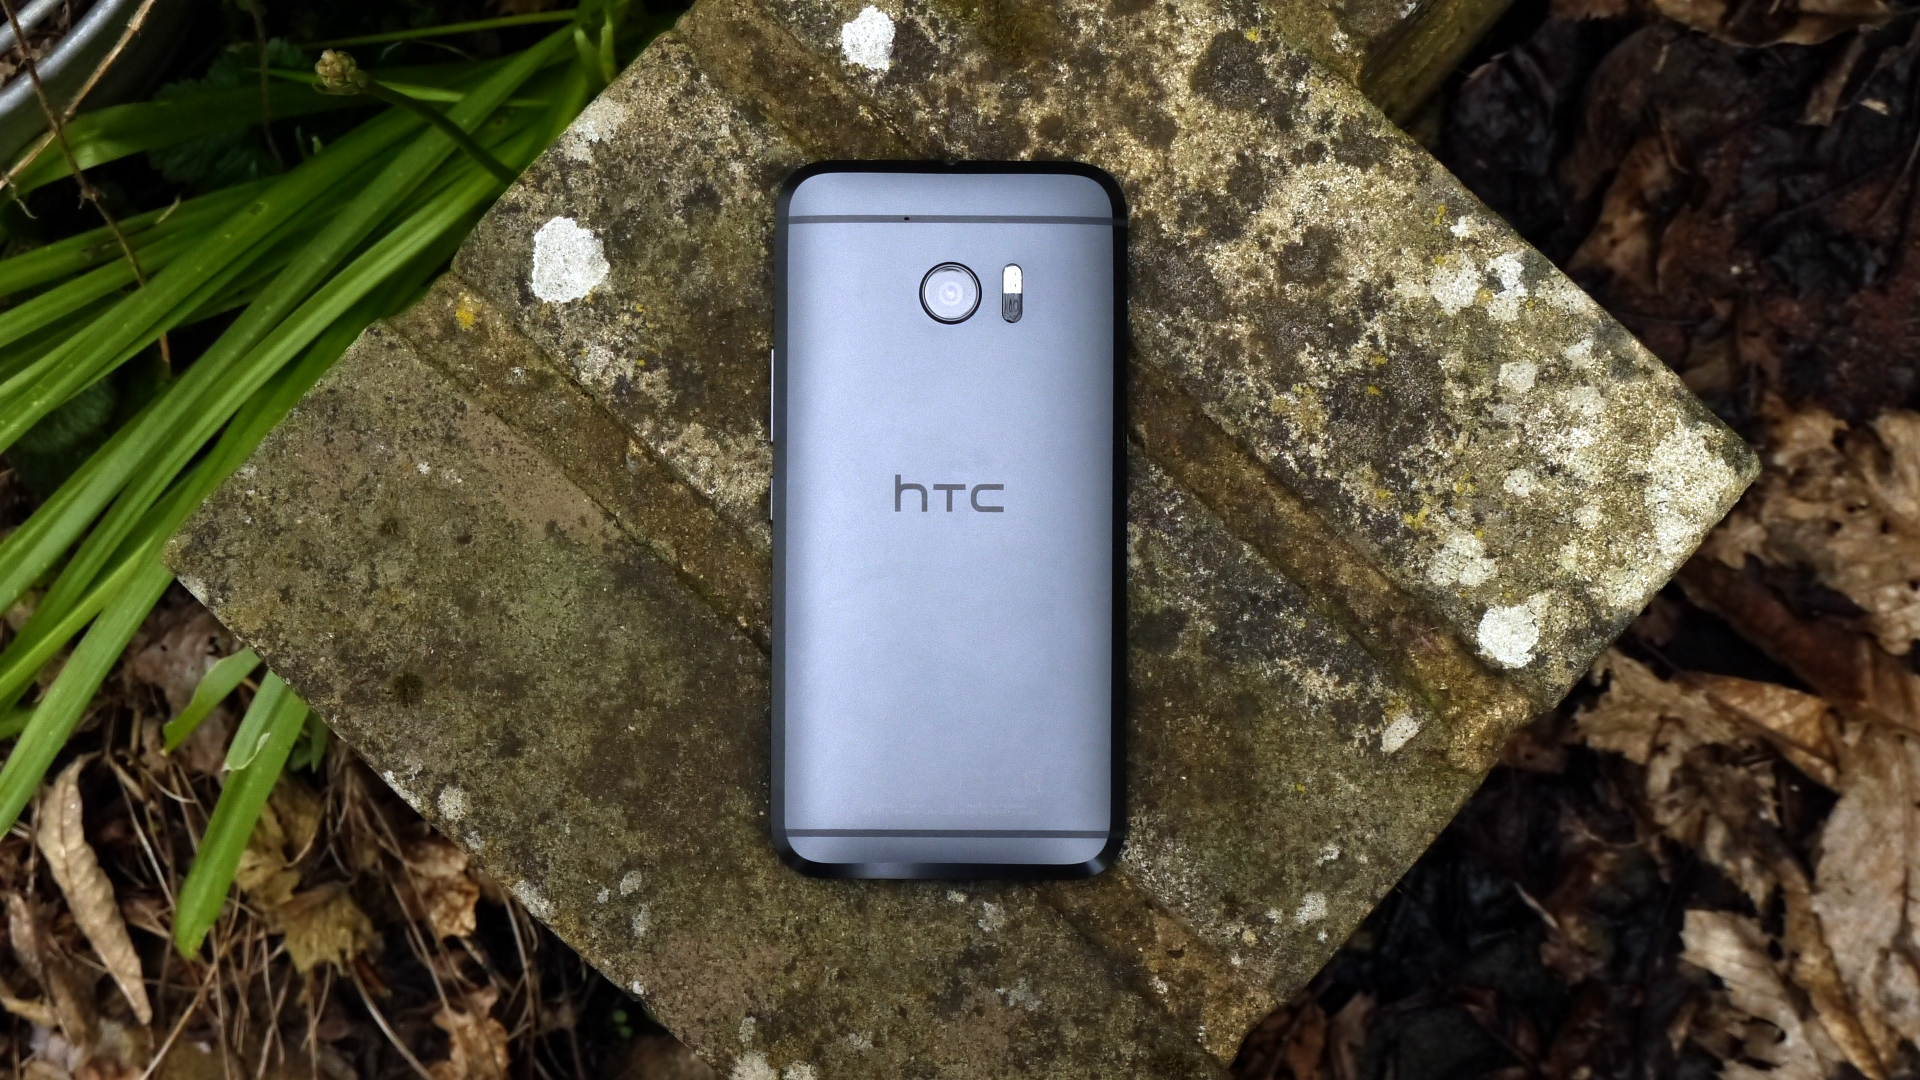 download htc music player to htc 10